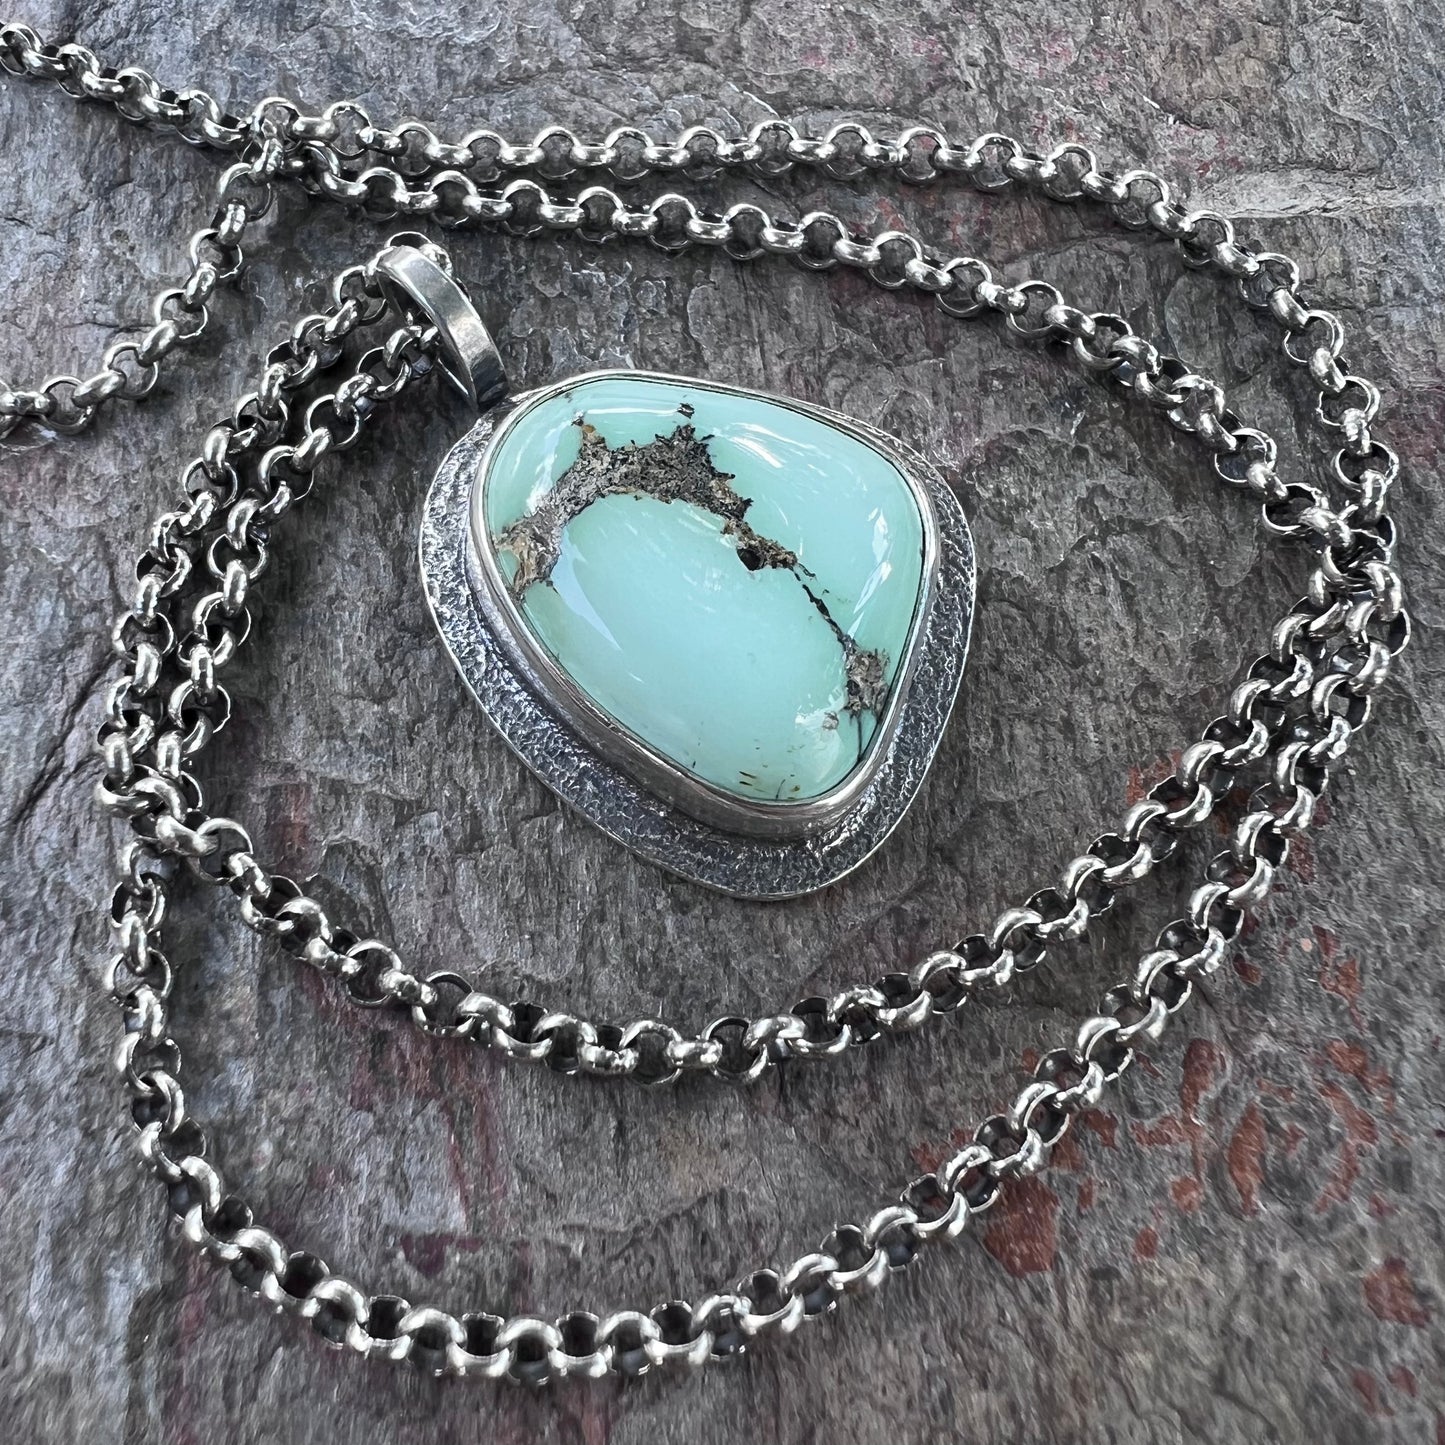 Sterling Silver Turquoise Freeform Necklace - One-of-a-Kind Turquoise Pendant on Sterling Silver Chain